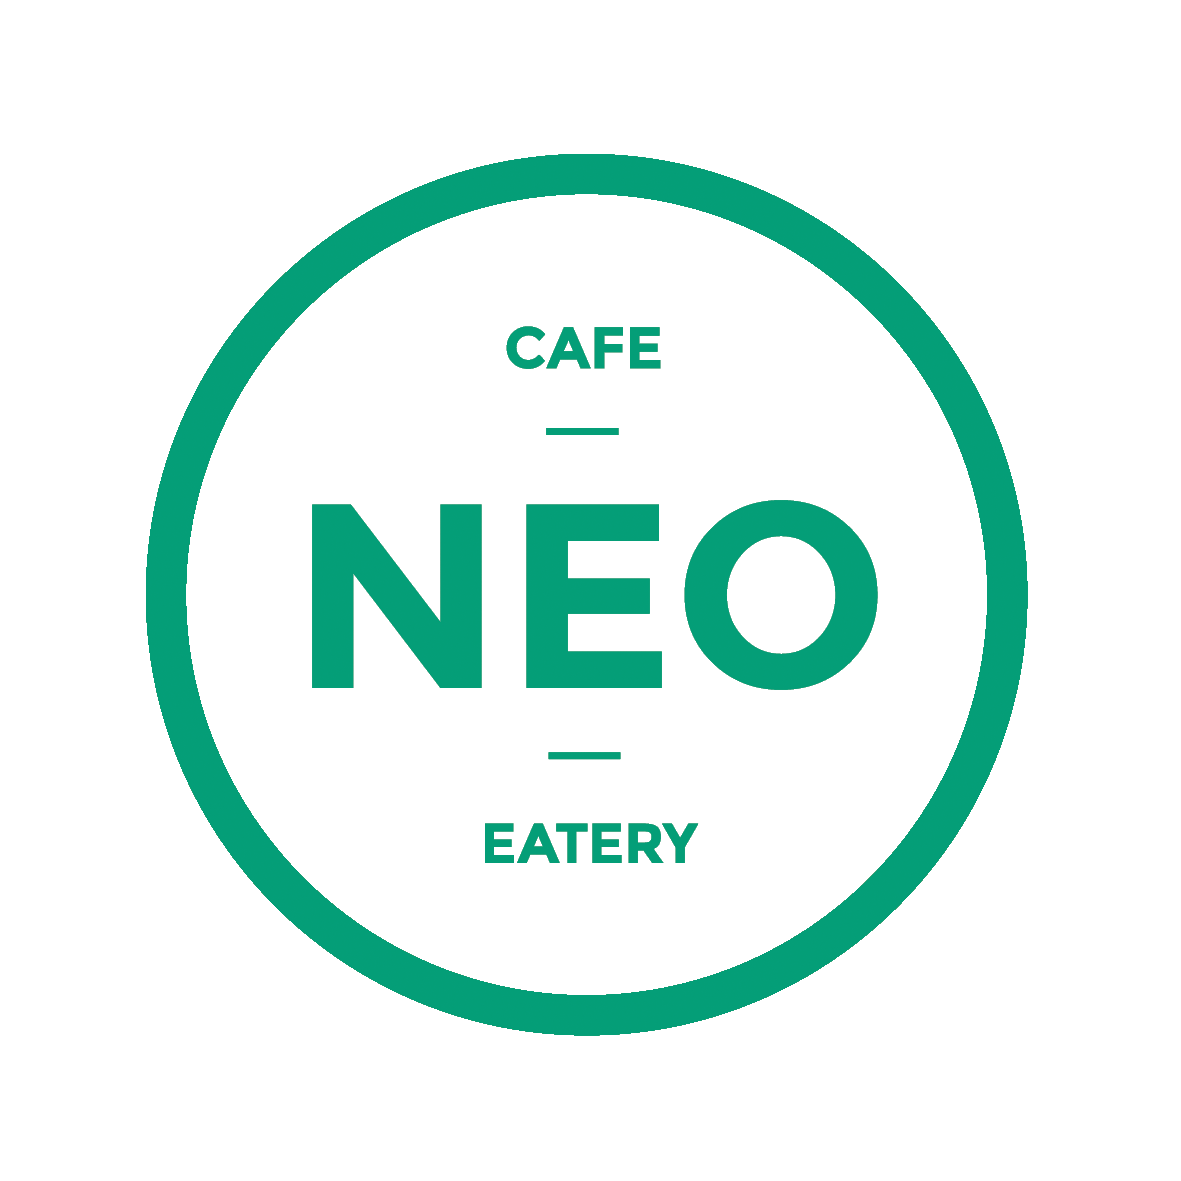 Neo Cafe & Eatery